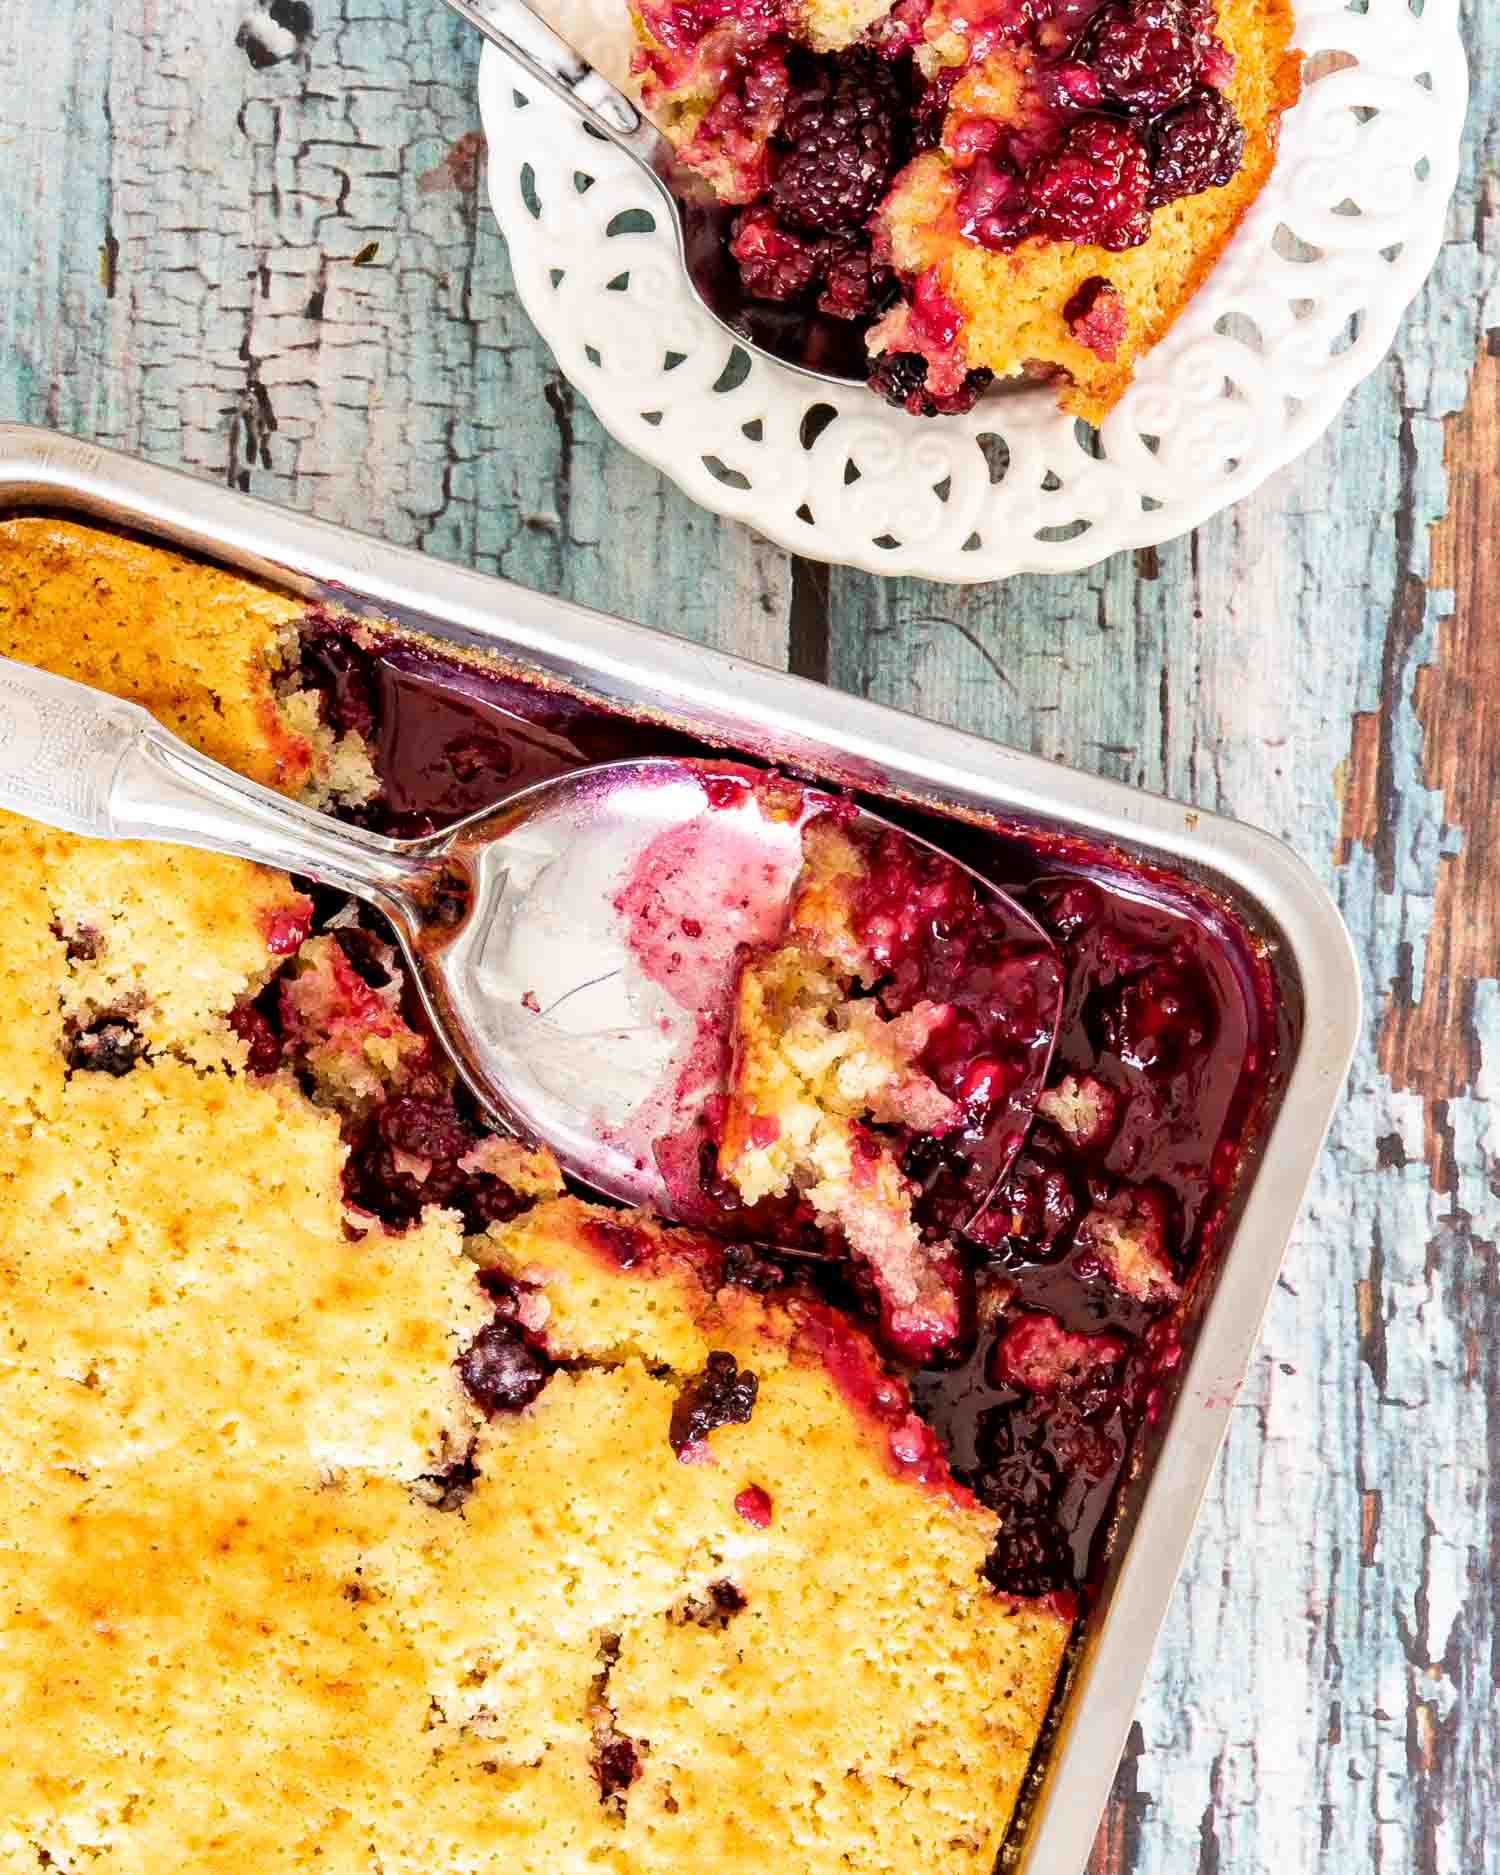 freshly baked blackberry cobbler in a baking pan with a couple servings missing and a serving spoon inside.